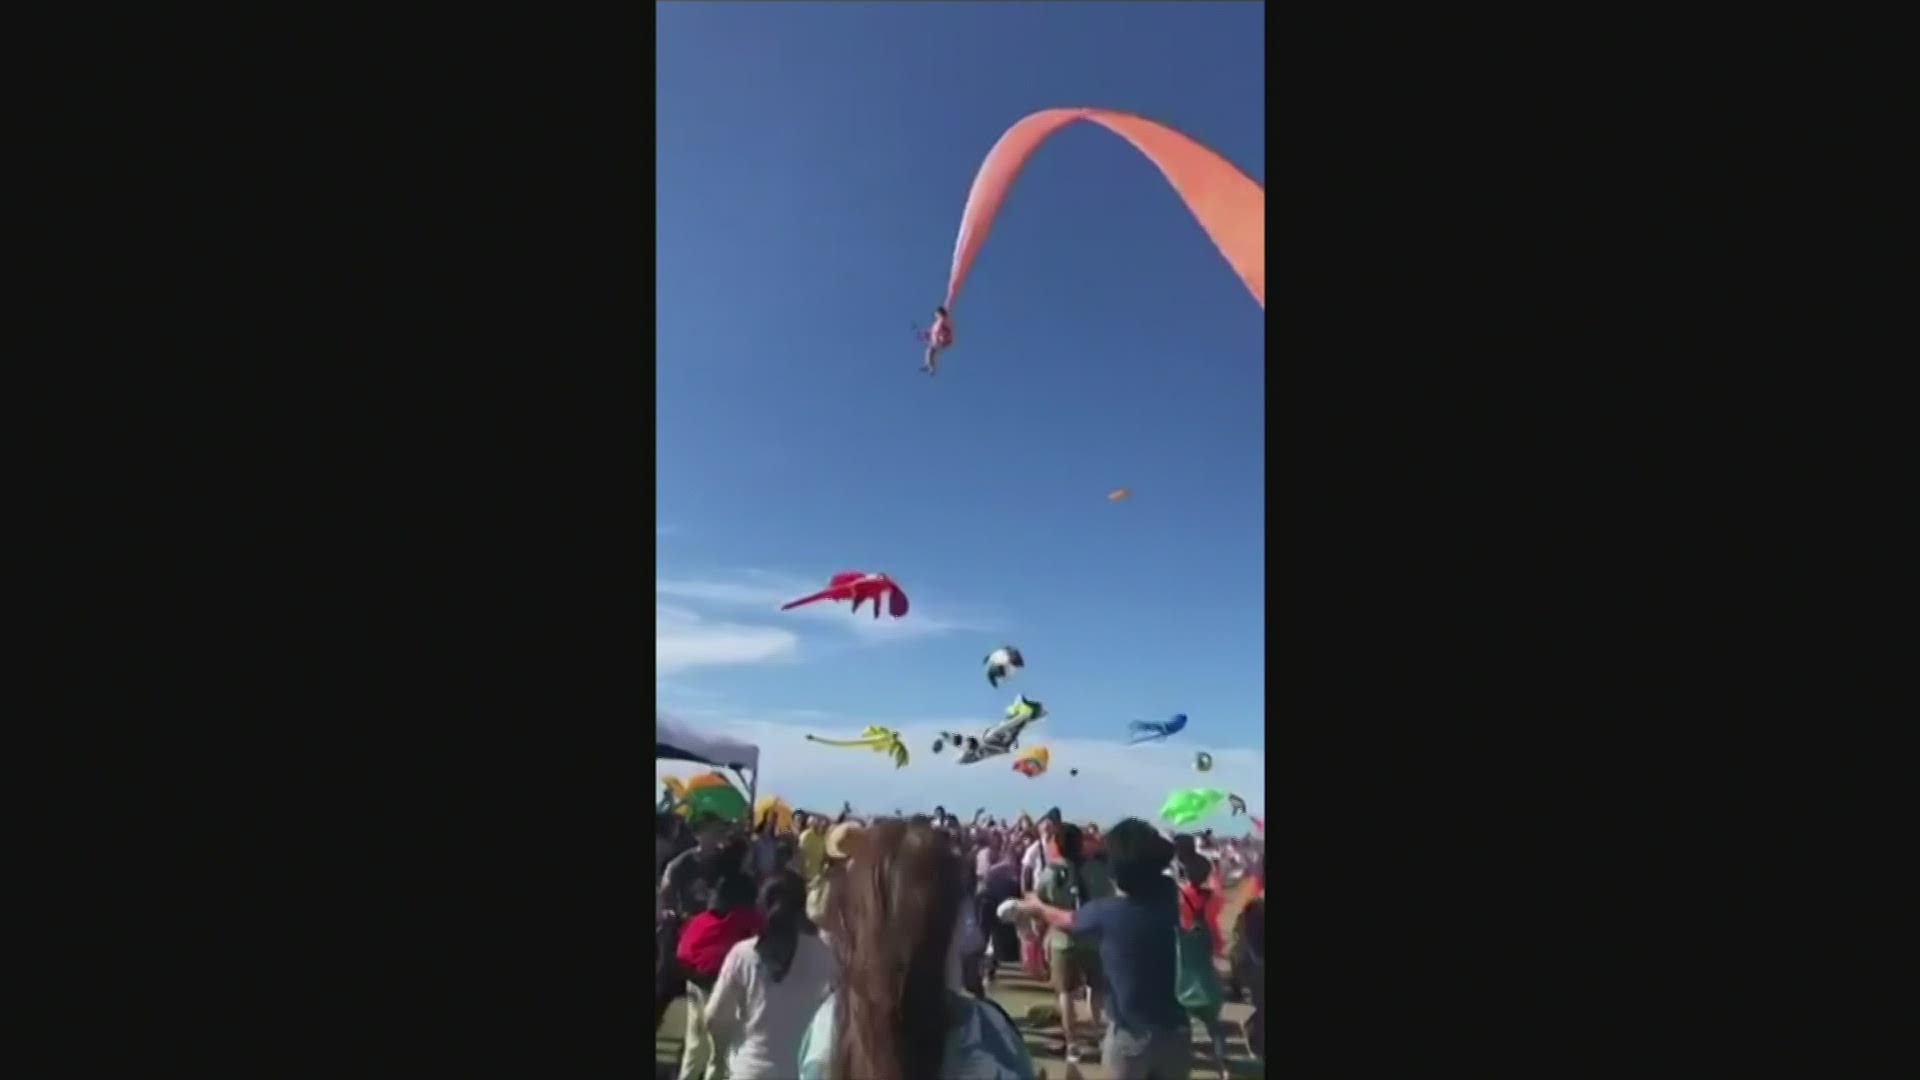 A 3-year old girl survived being swept ten meters up into the air after becoming entangled with the strings of a large kite during a festival in Taiwan.